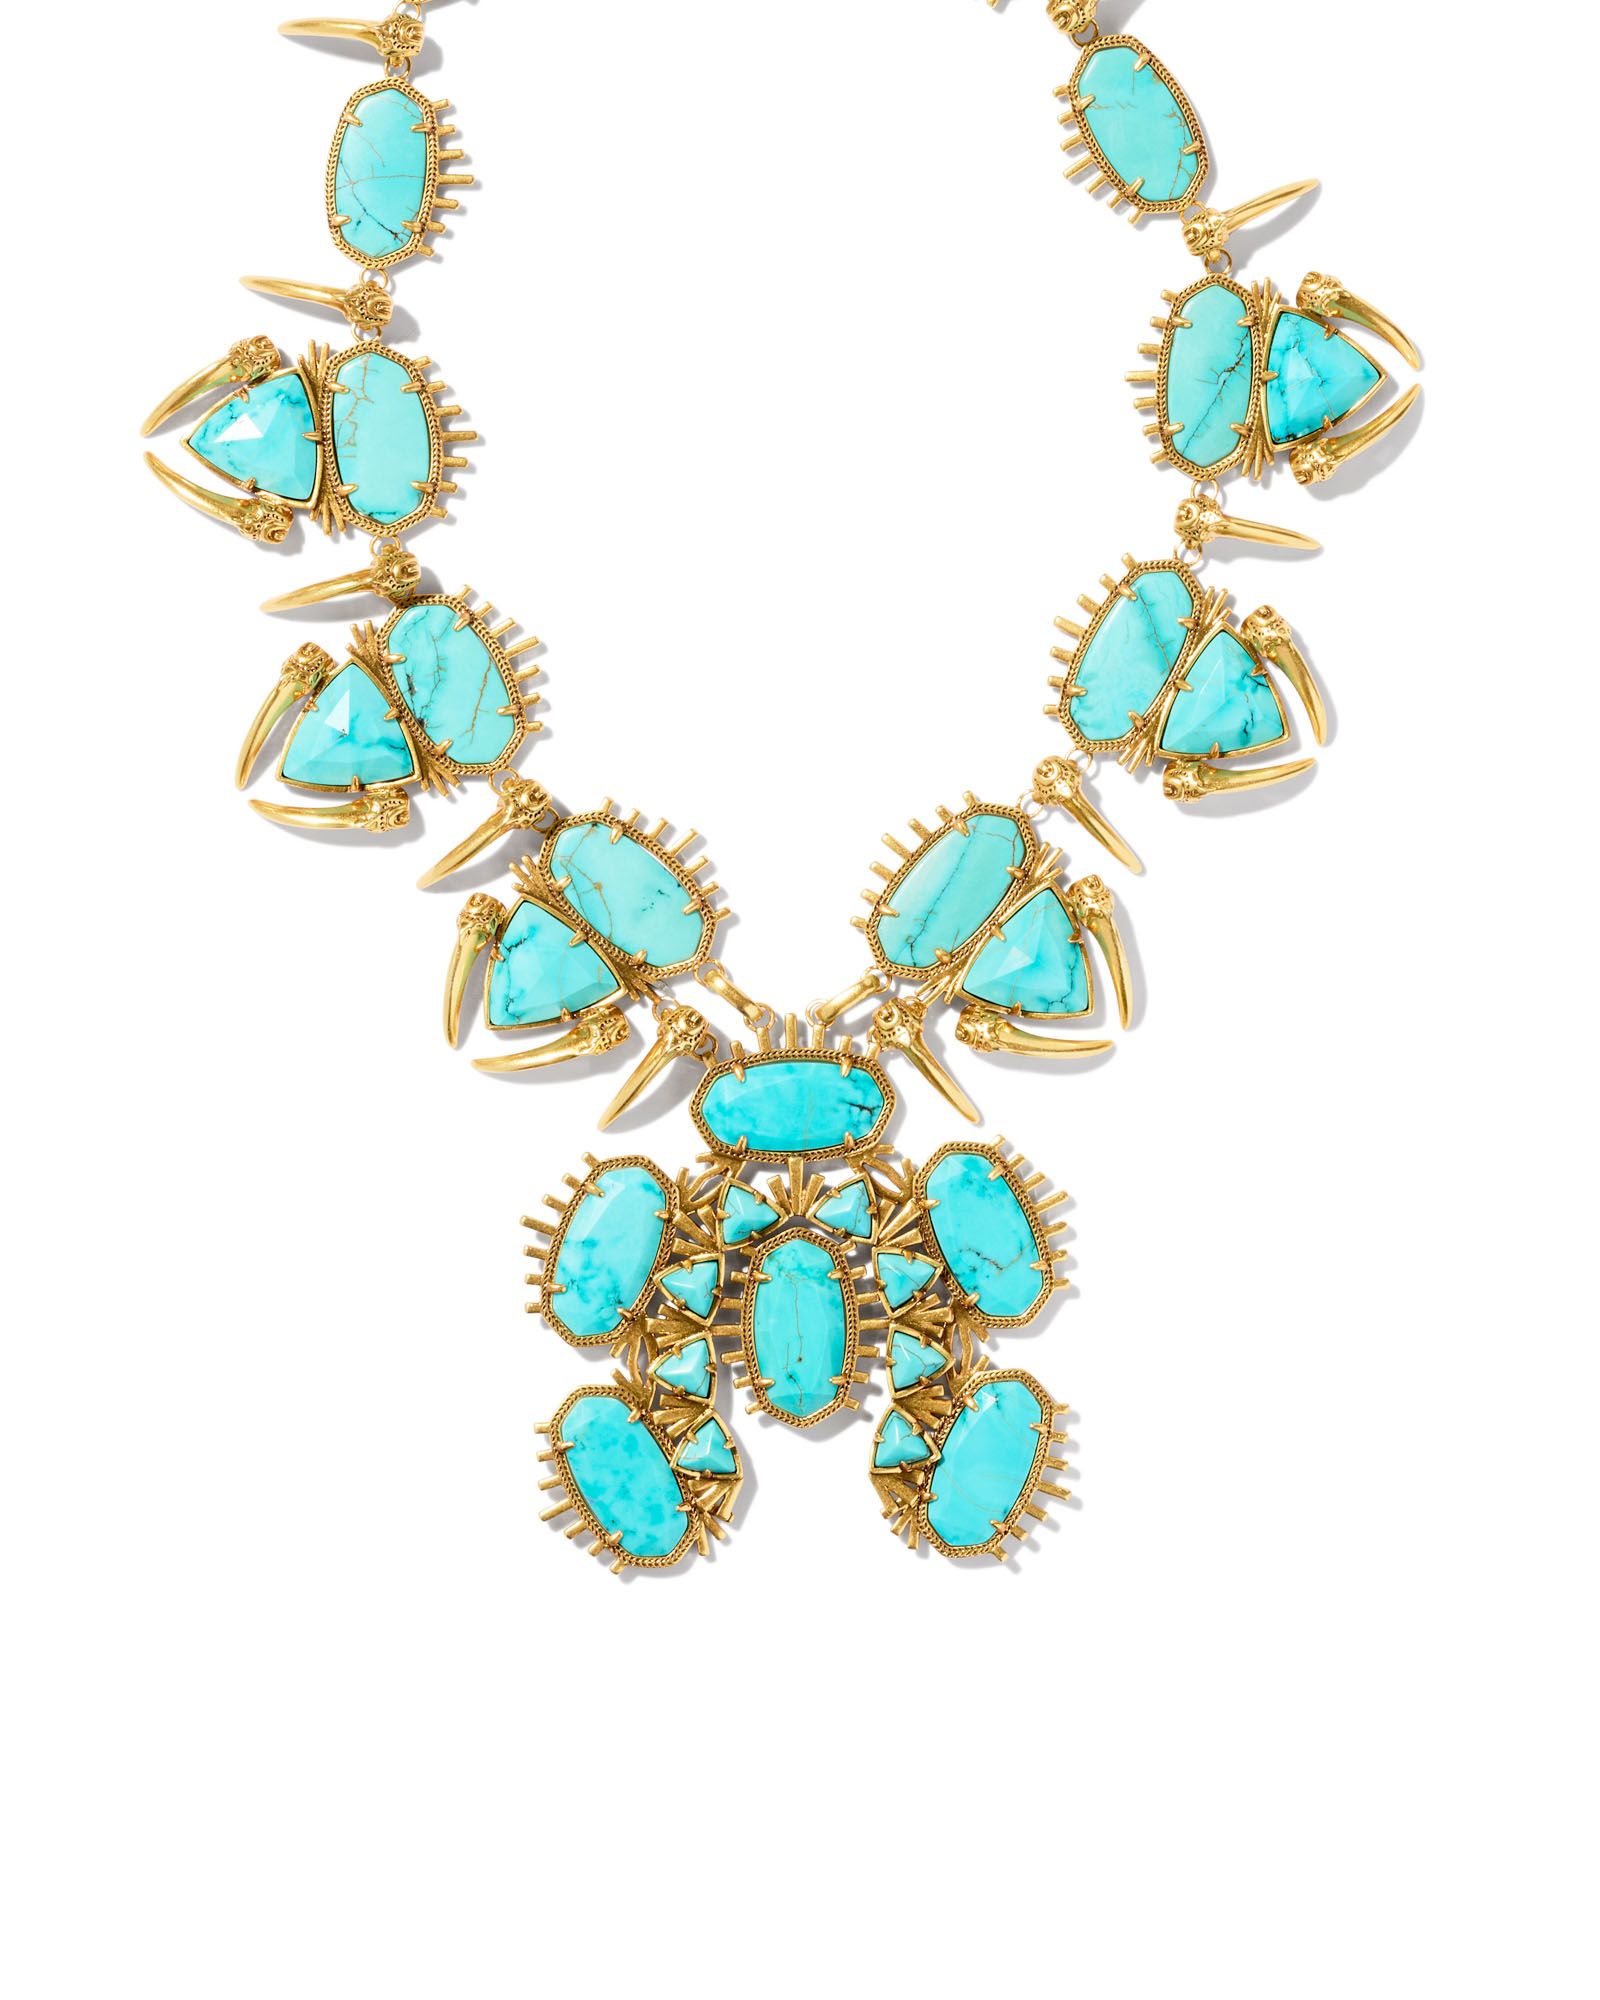 Odessa Vintage Gold Statement Necklace in Variegated Turquoise Magnesite | Kendra Scott